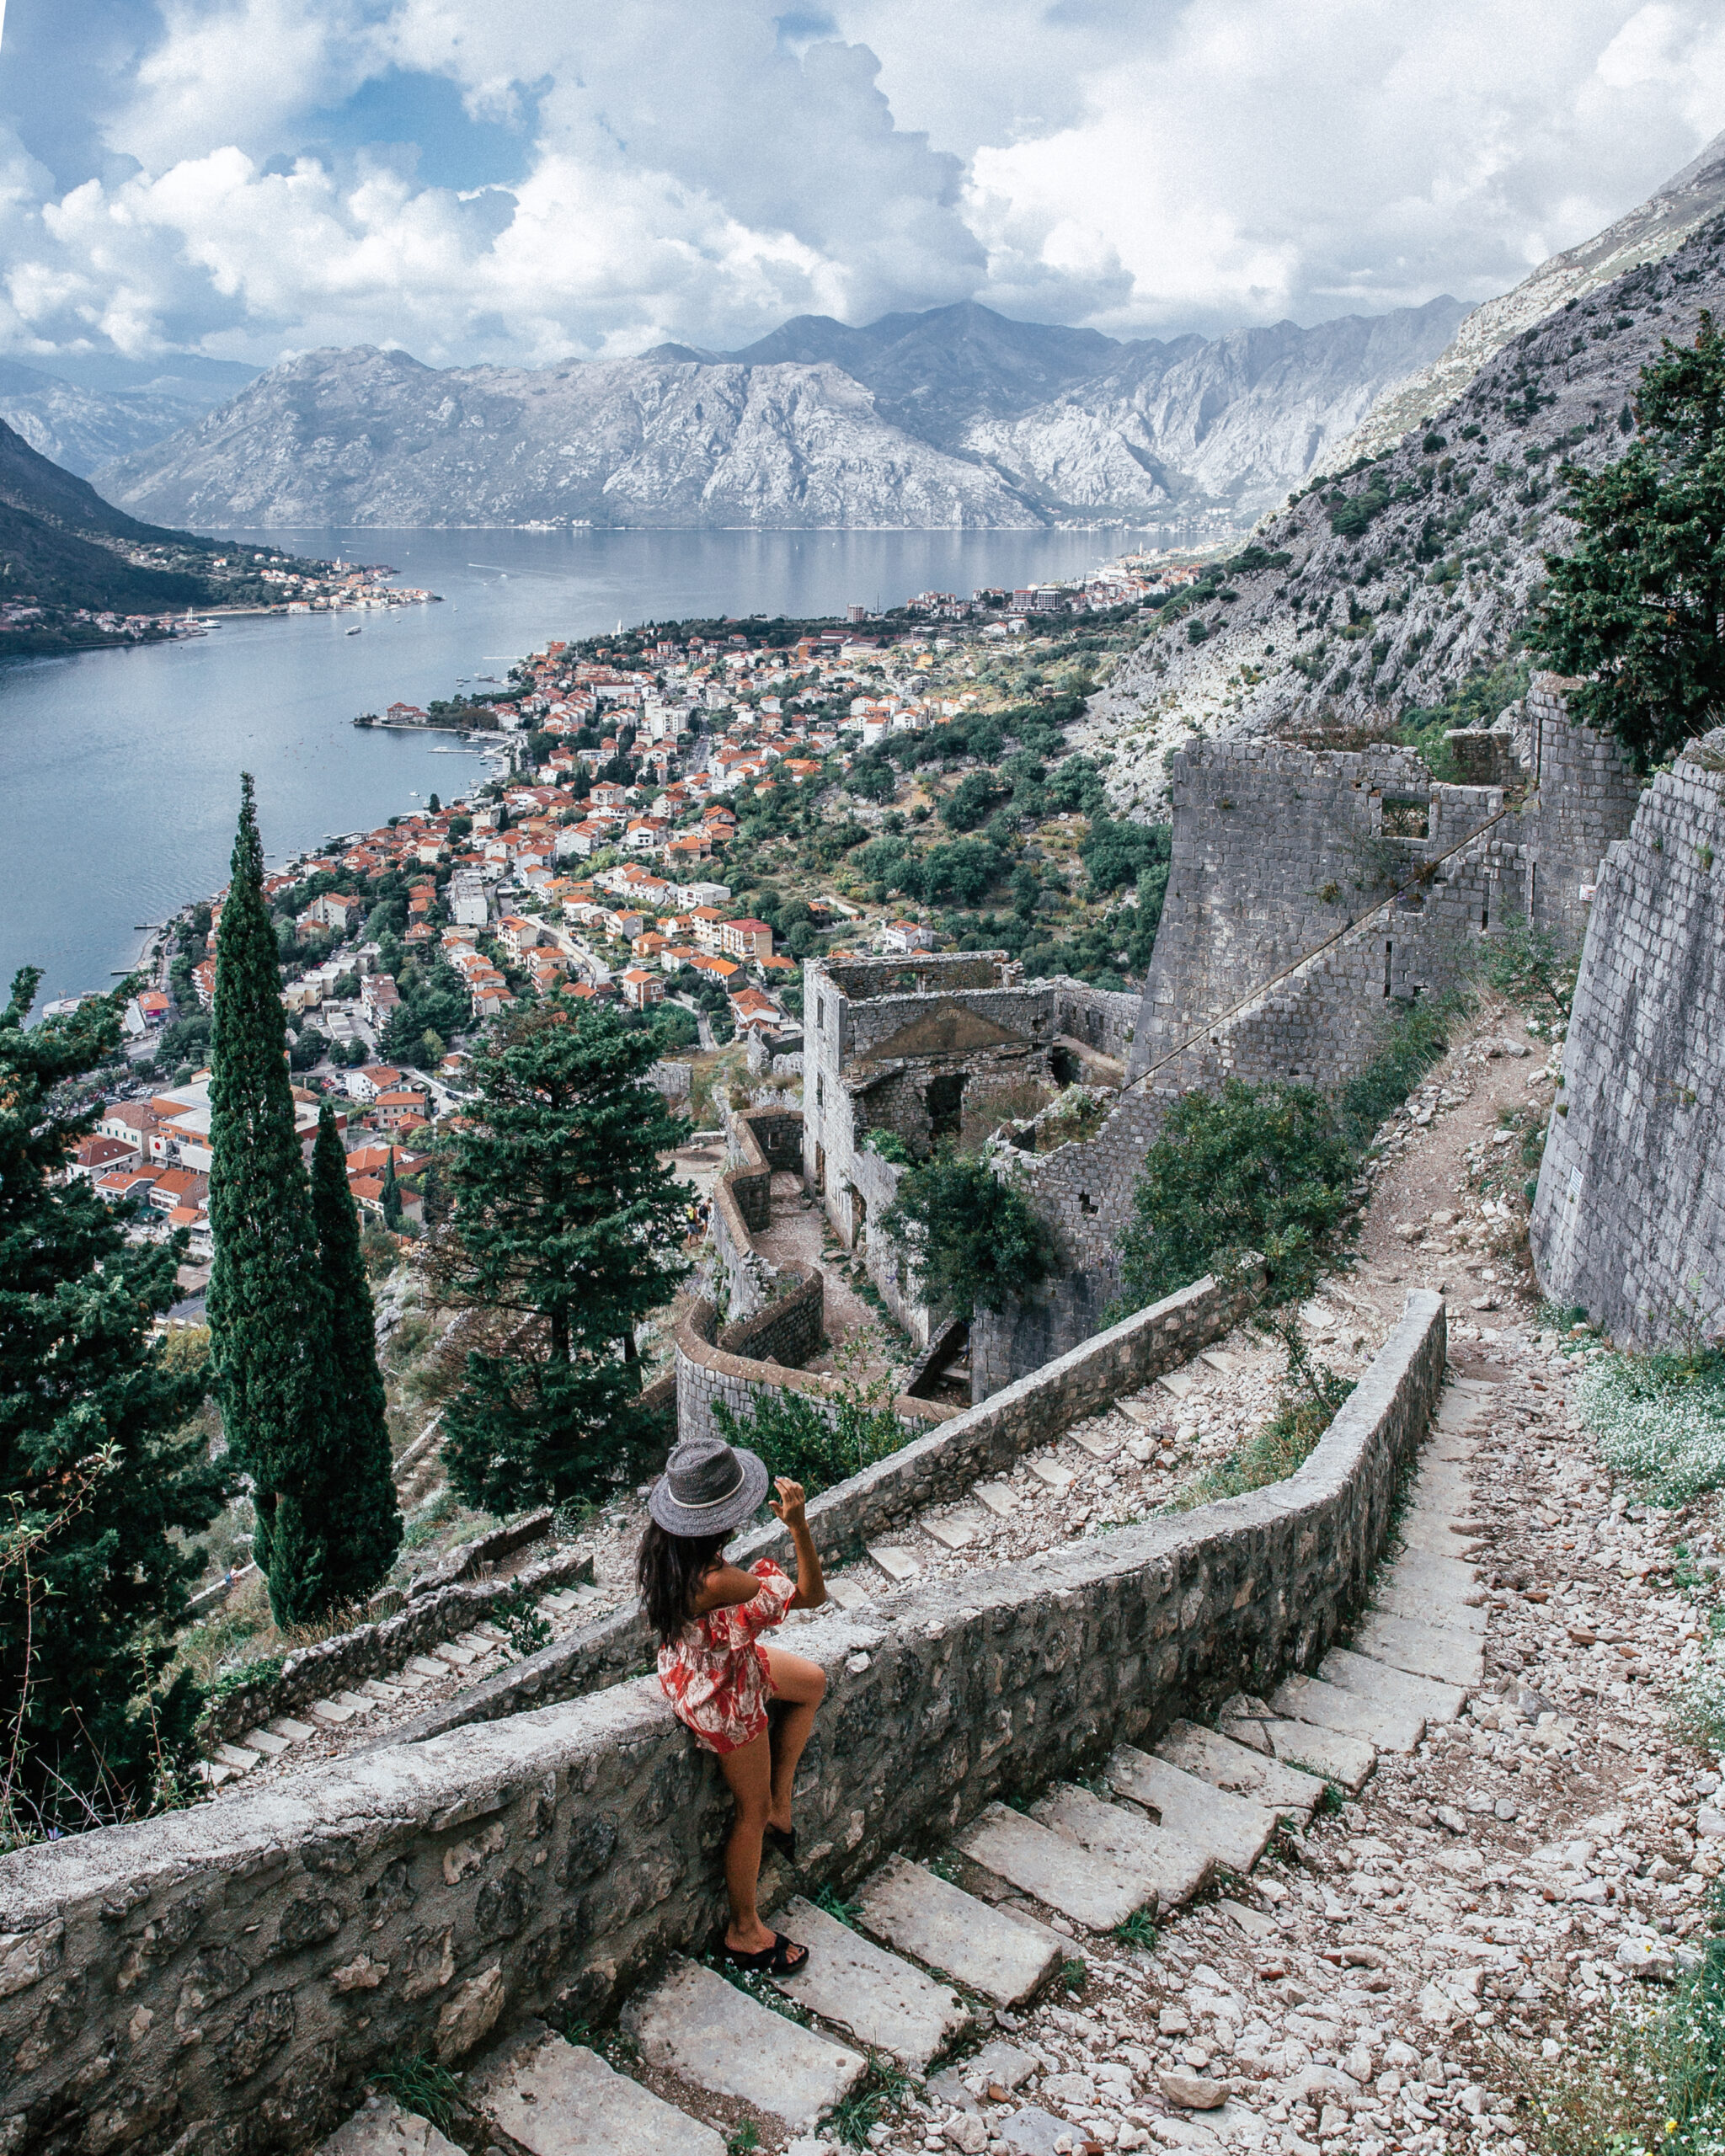 A complete travel guide to Monteregro's Bay of Kotor including the best towns, beaches, hikes and hotels in Kotor, Budva and Sveti Stefan.